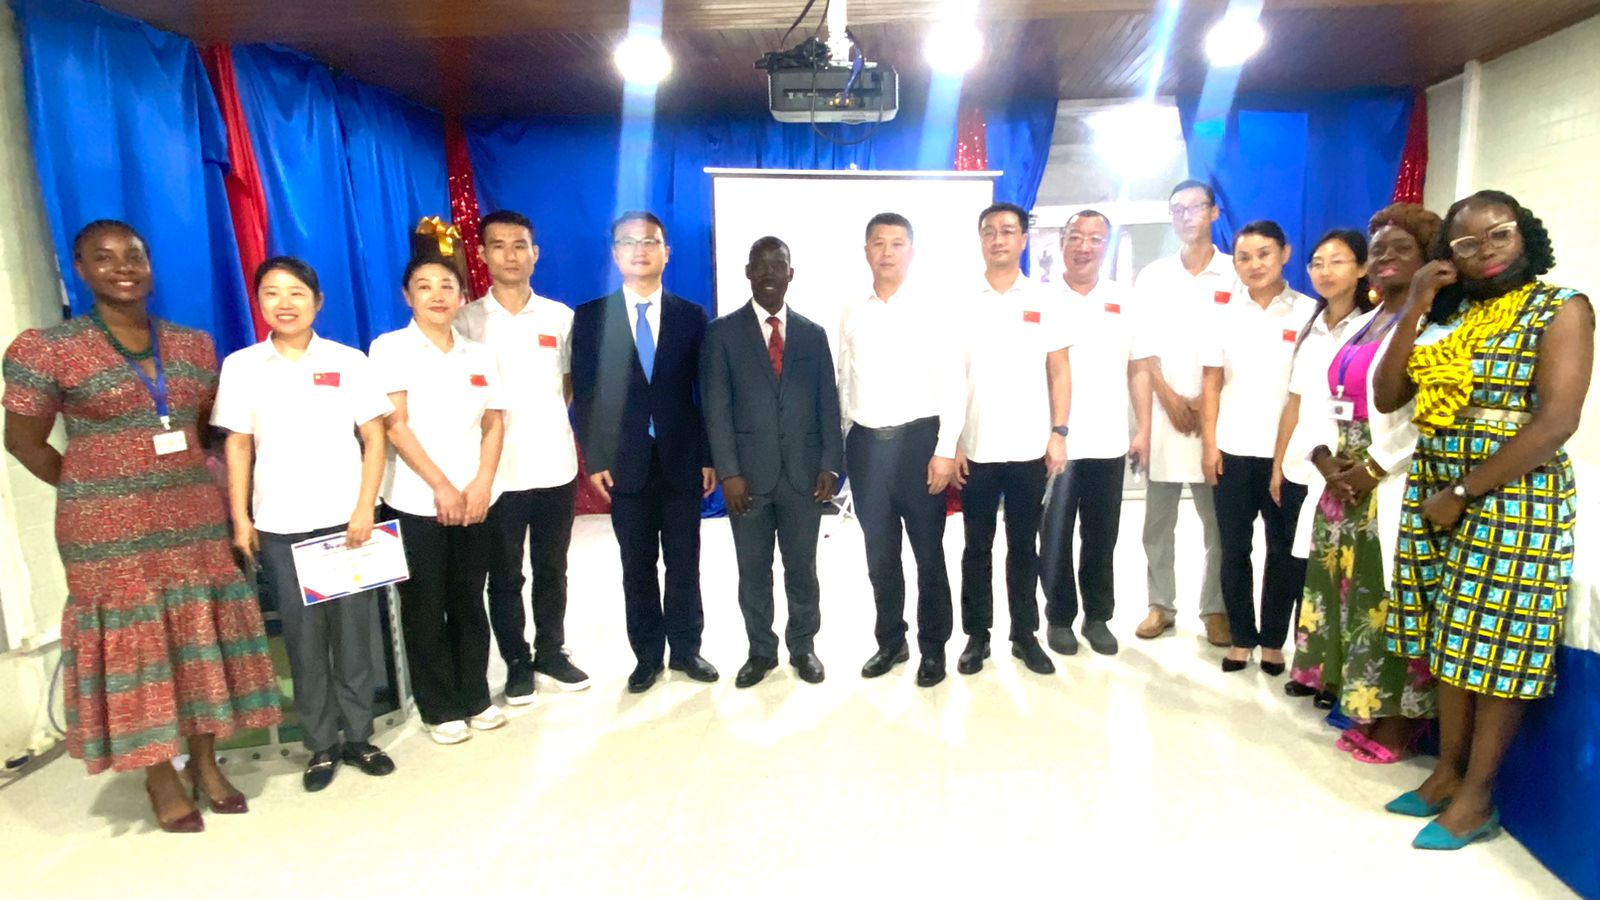 LIBERIA RECEIVES NEW TEAM OF CHINESE HEALTH PROFESSIONALS